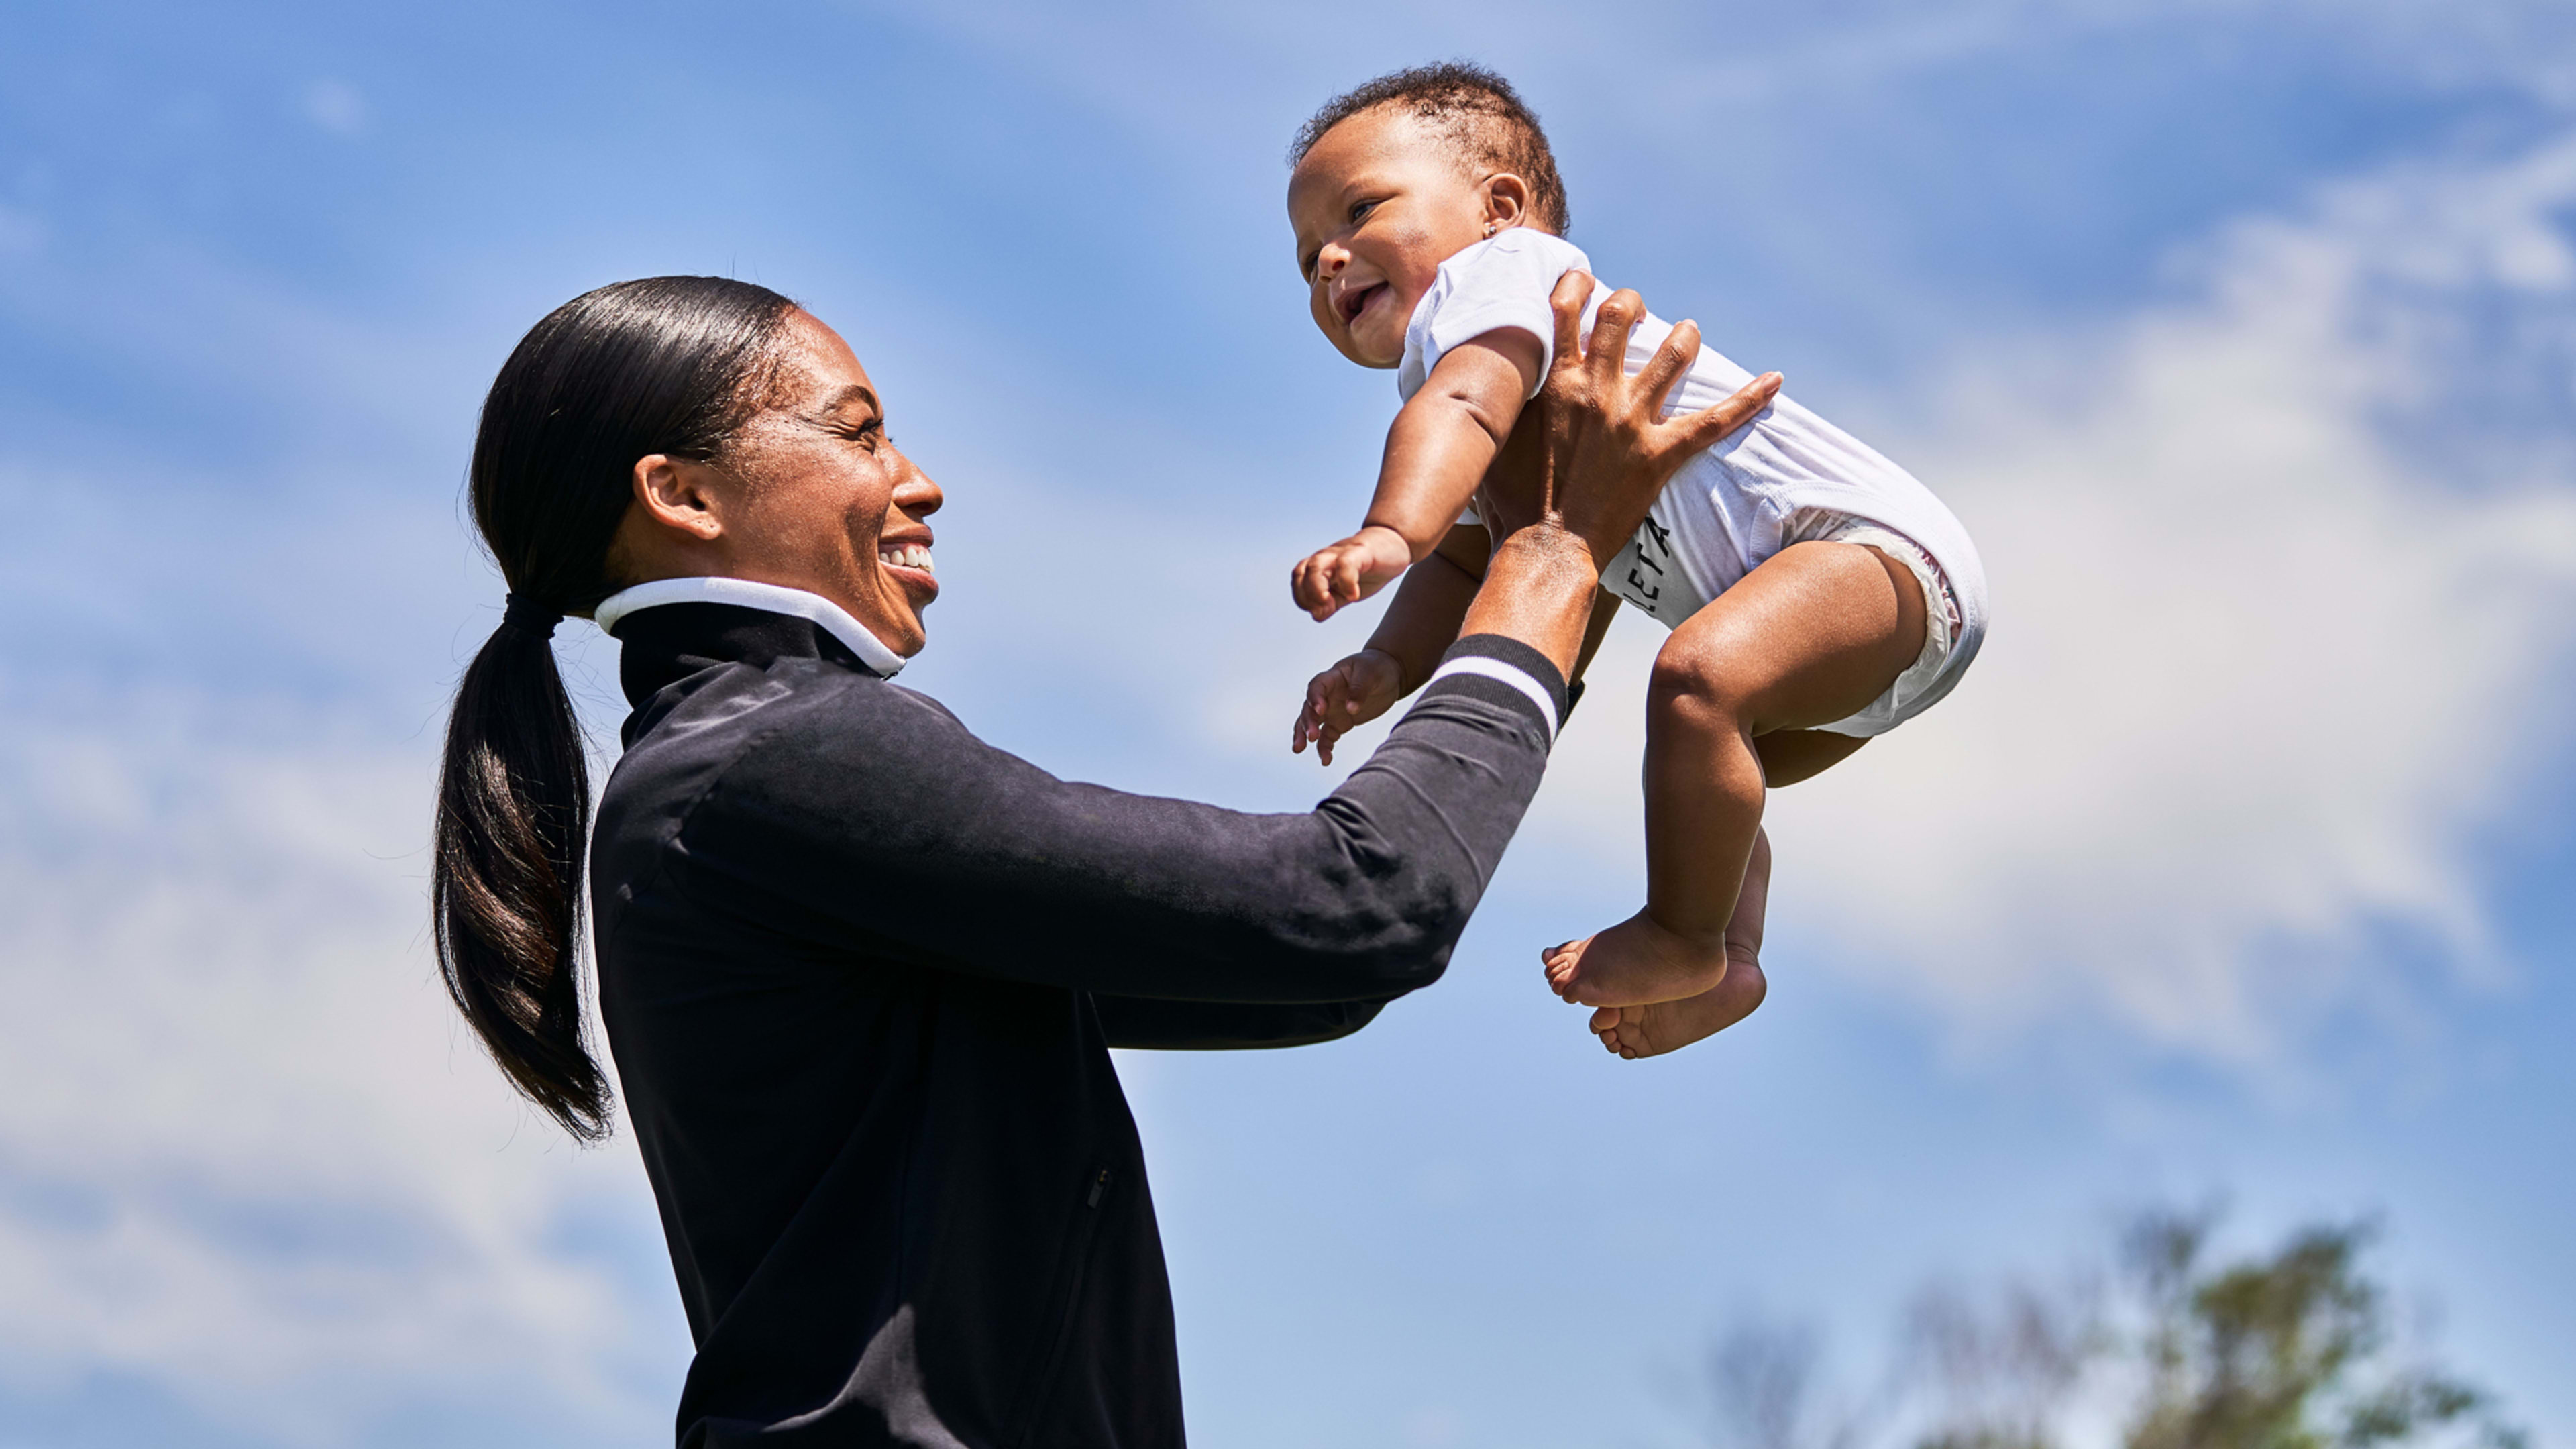 Gap’s Athleta brand signs track star Allyson Felix, who left Nike over its pregnancy policy